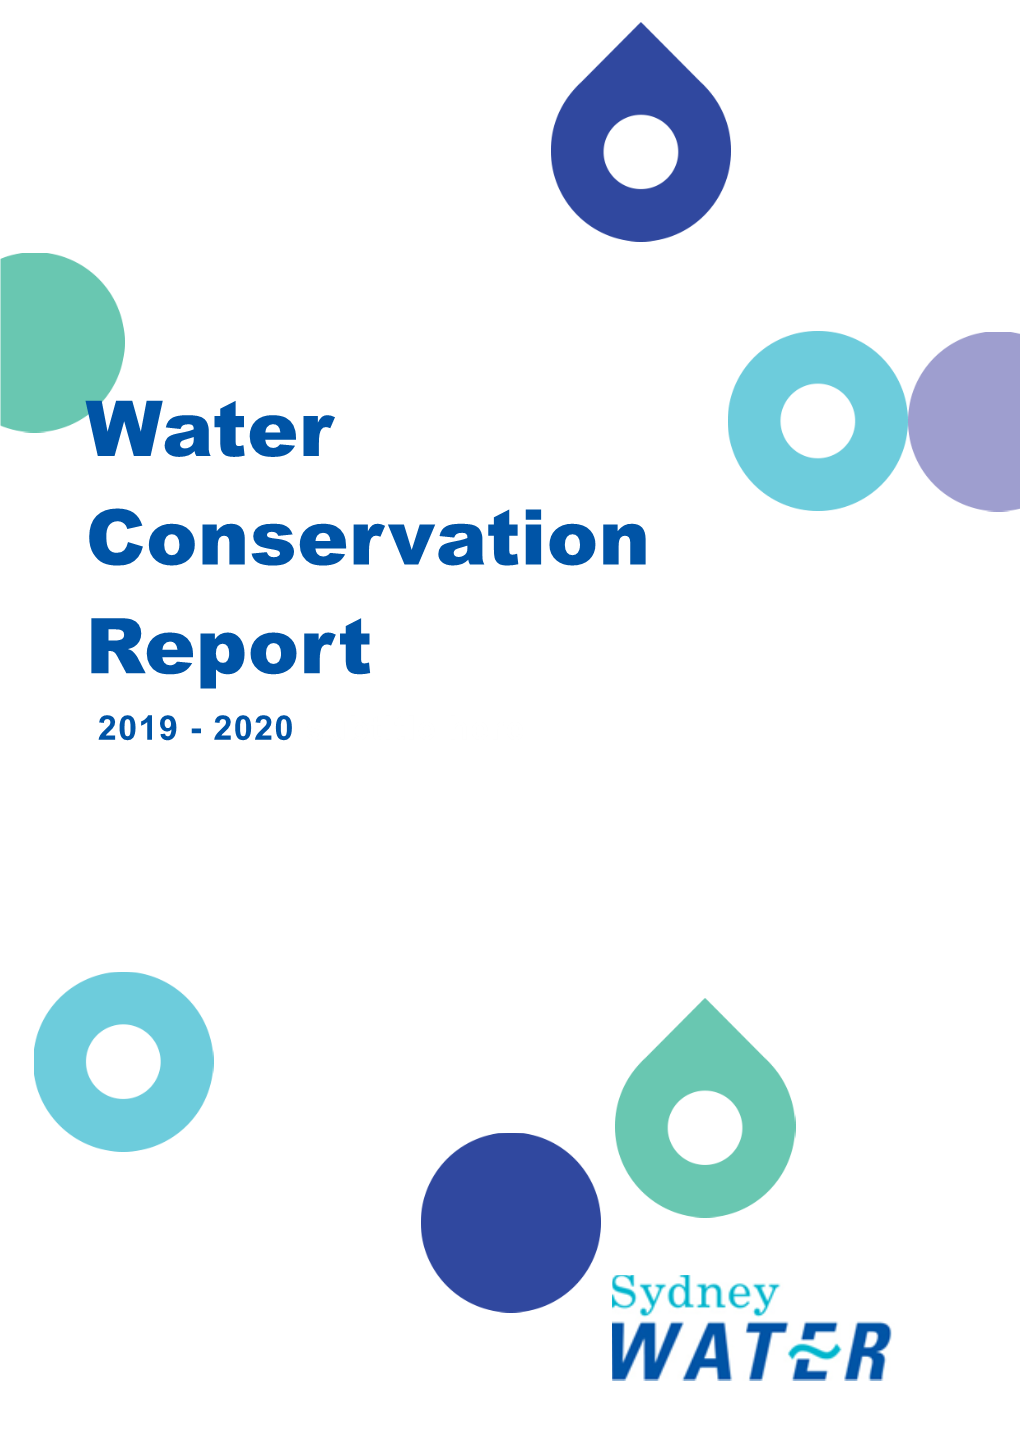 Water Conservation Report 2019 - 2020 Subtitle Here